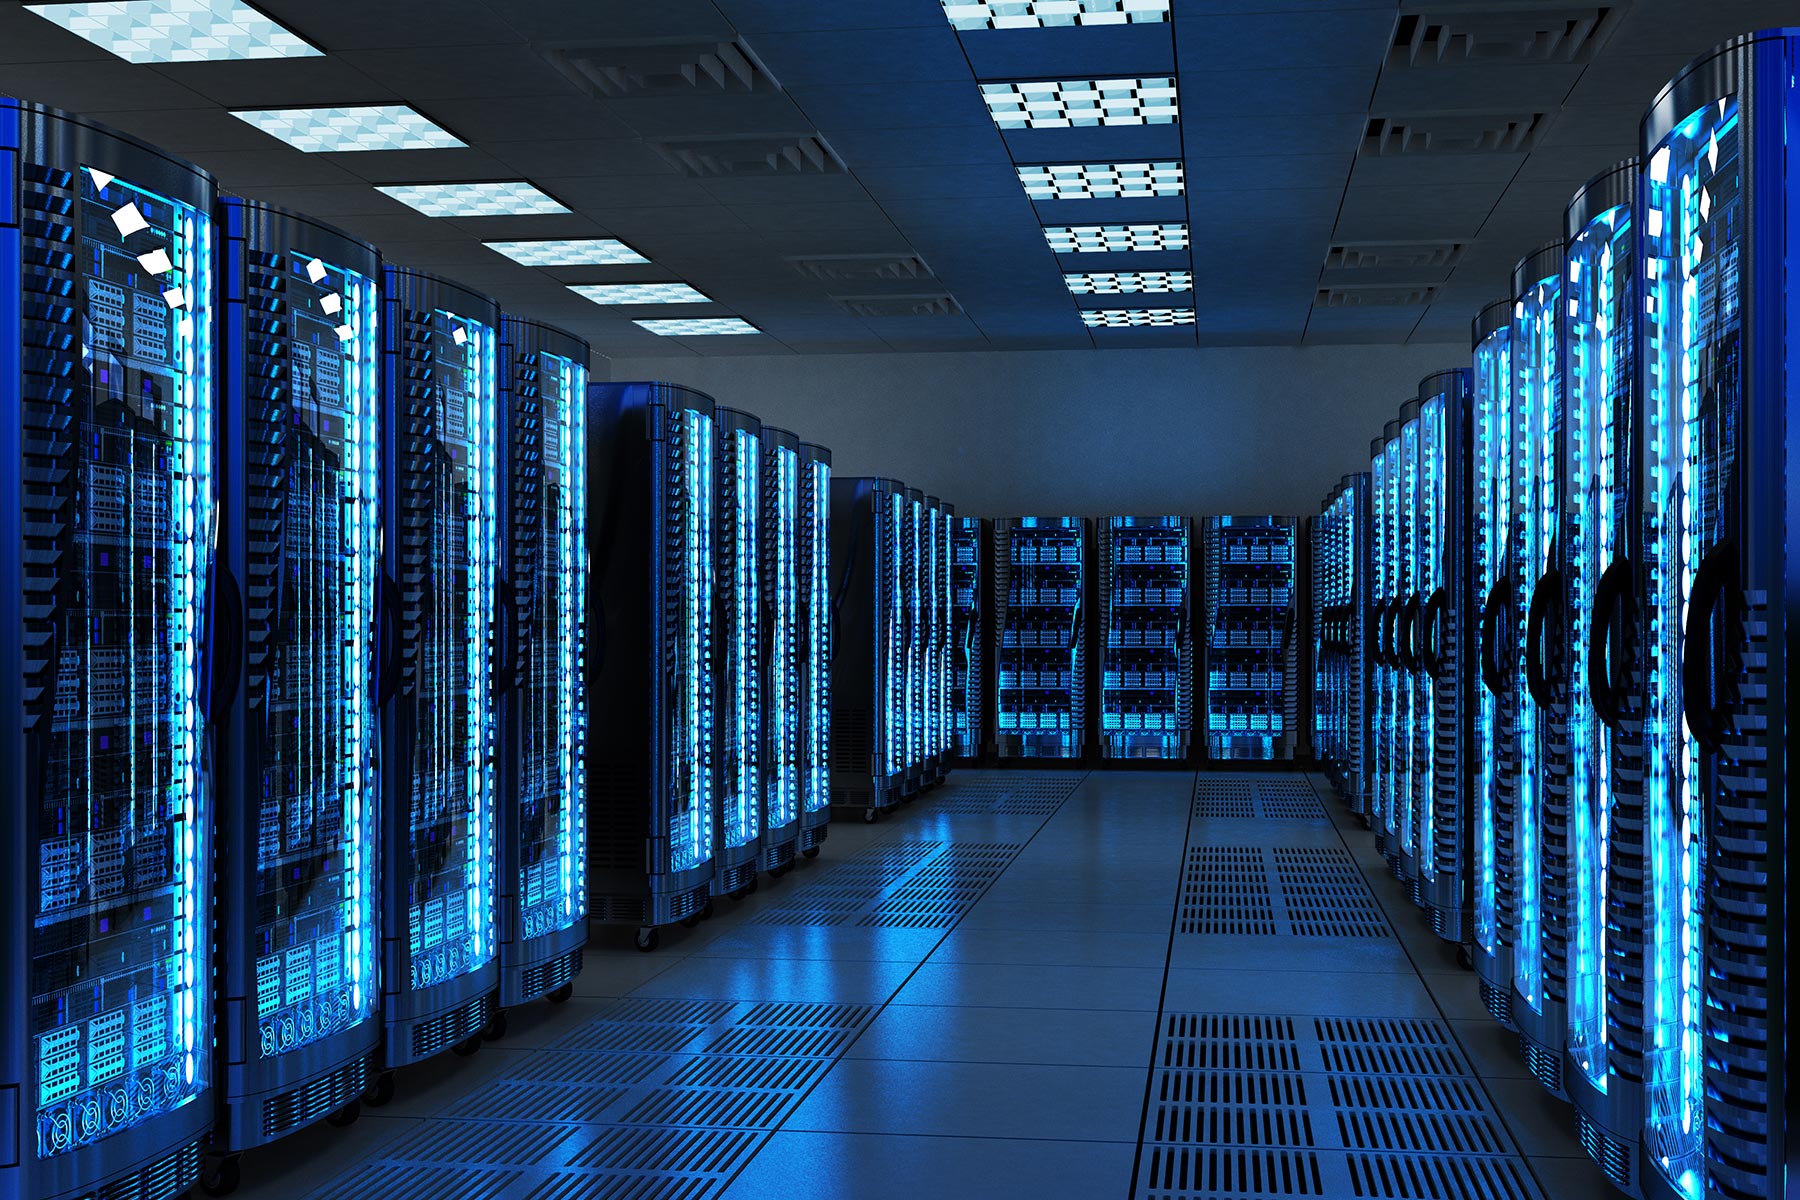 When you think of managed hosting, what comes to mind?